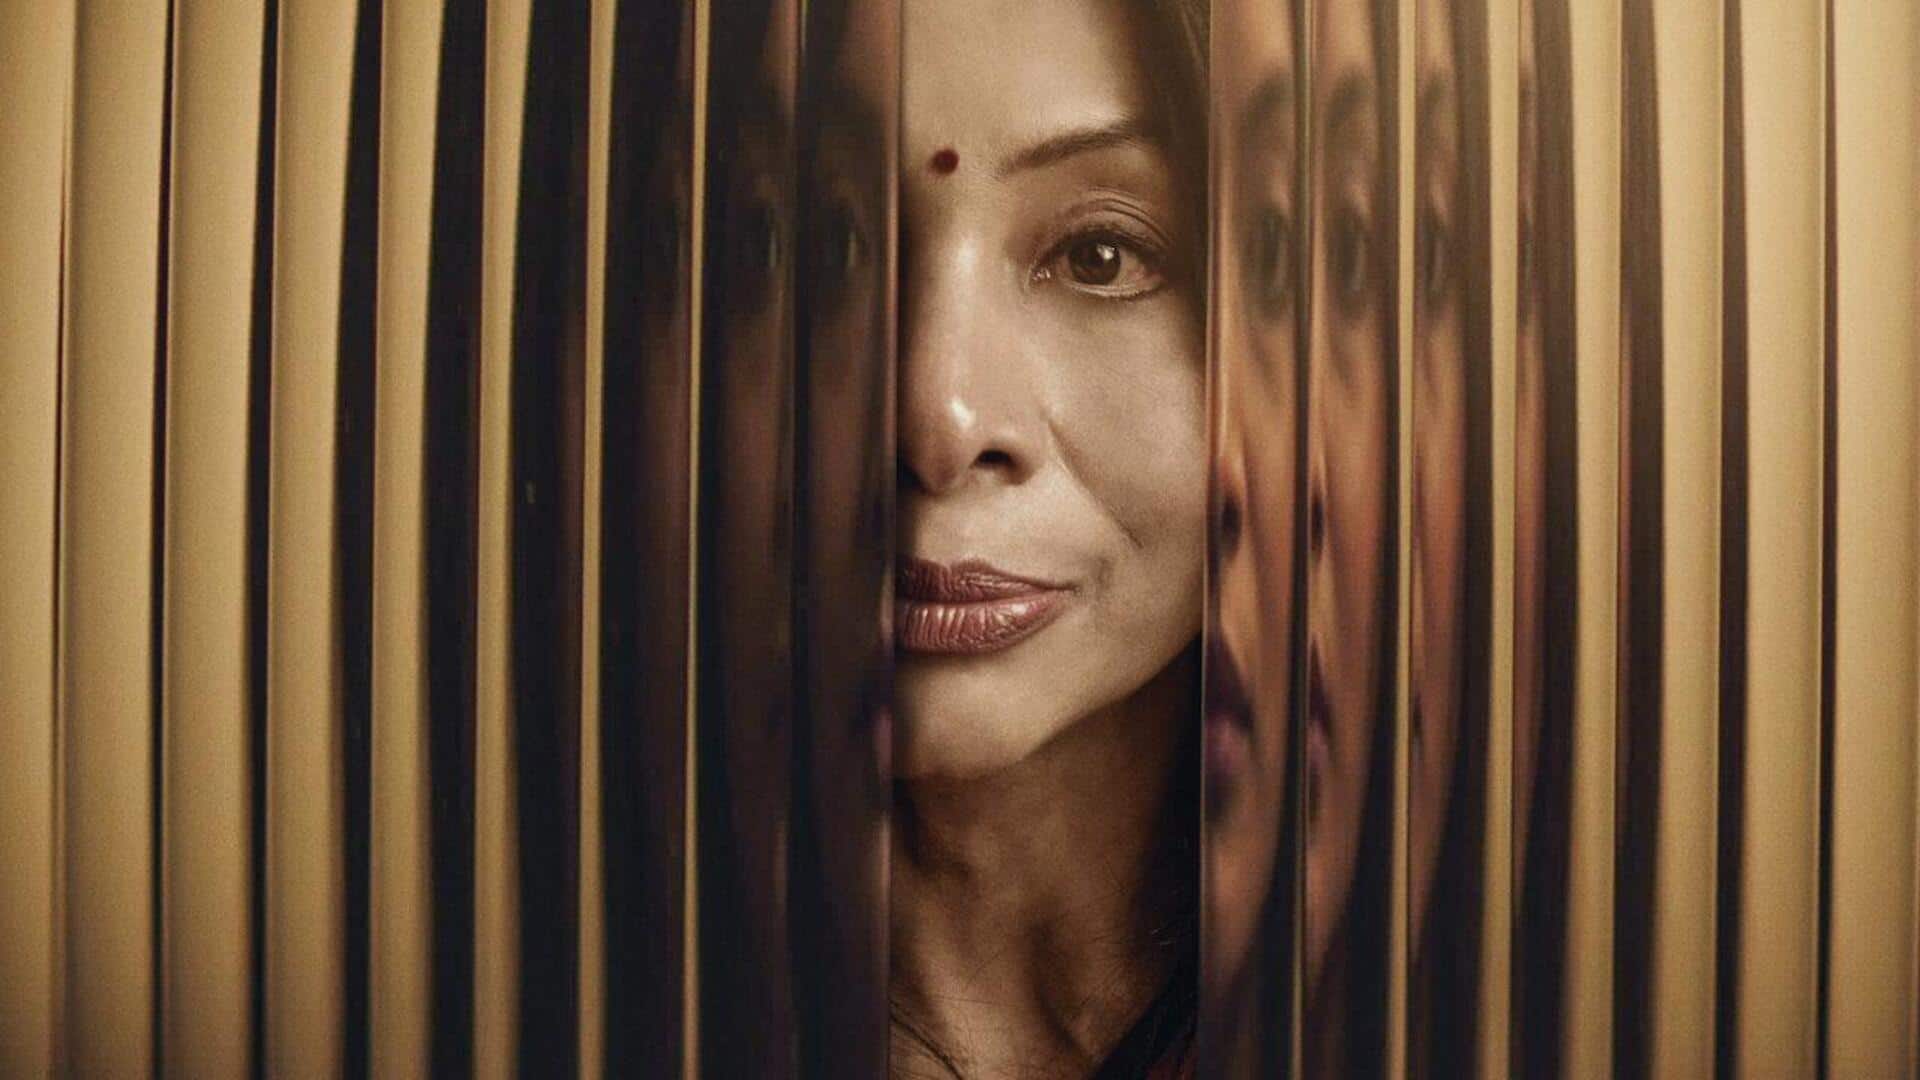 Trailer: 'The Indrani Mukerjea Story' to deep-dive into infamous case